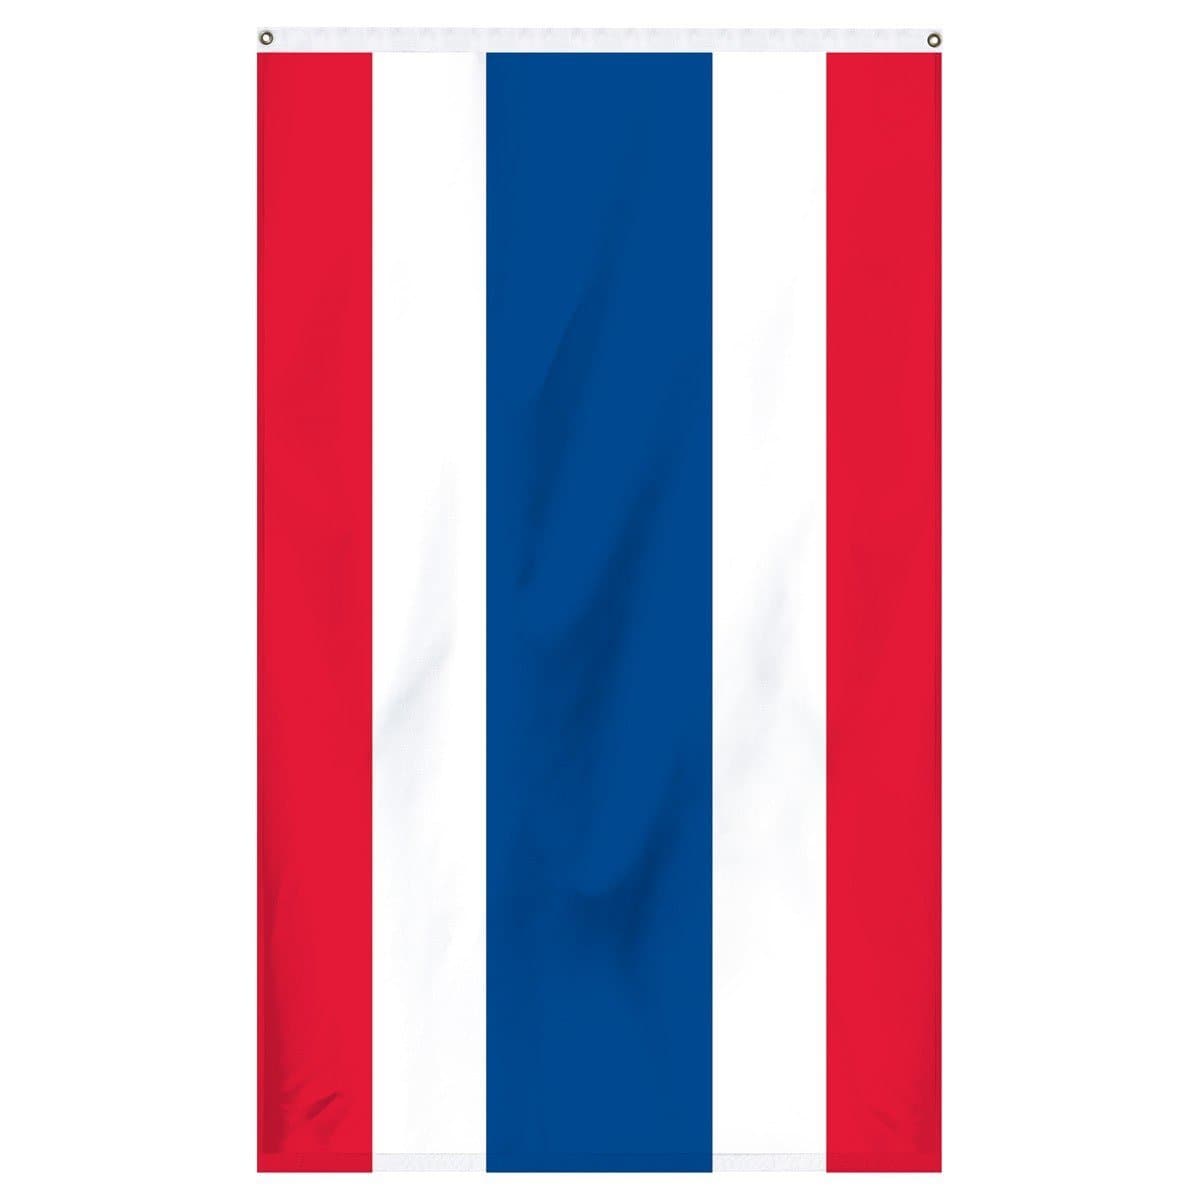 Thailand National Flag for sale to buy online from Atlantic Flag and Pole. Red, white, and blue flag with two red stripes, 2 white stripes, and a large blue stripe in the middle.